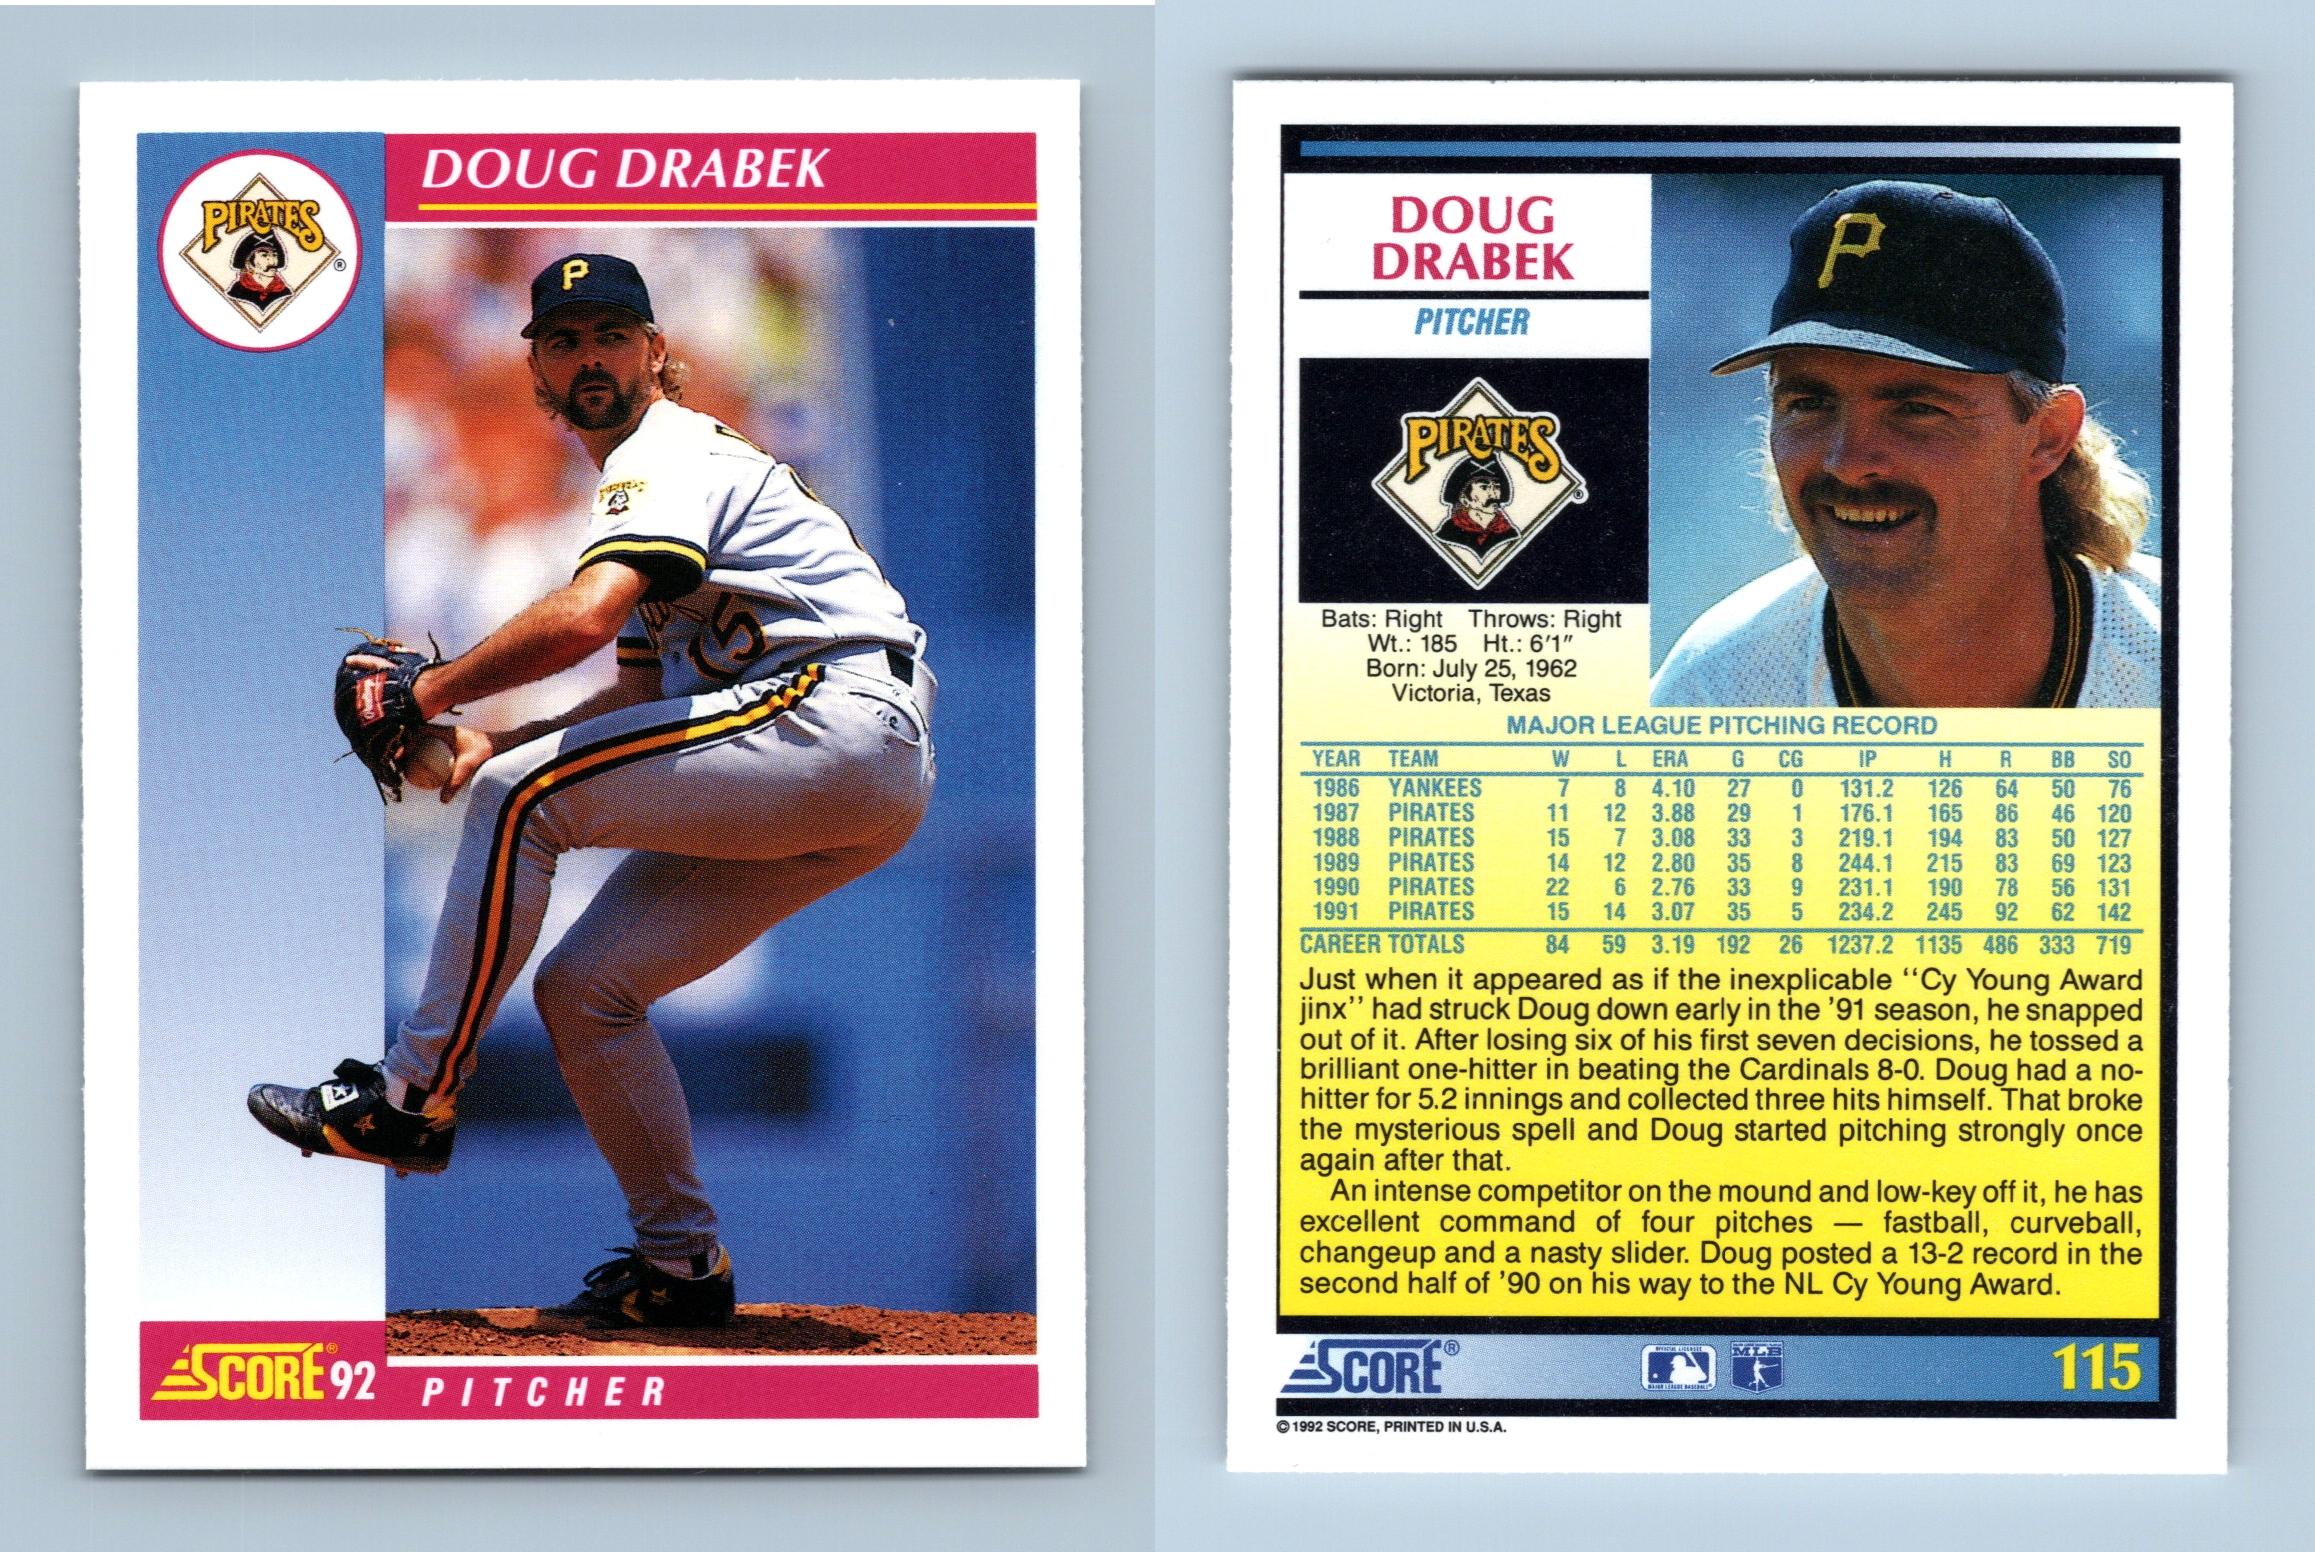 Always a good time here:' Doug Drabek reflects on Pirates career, '92 team